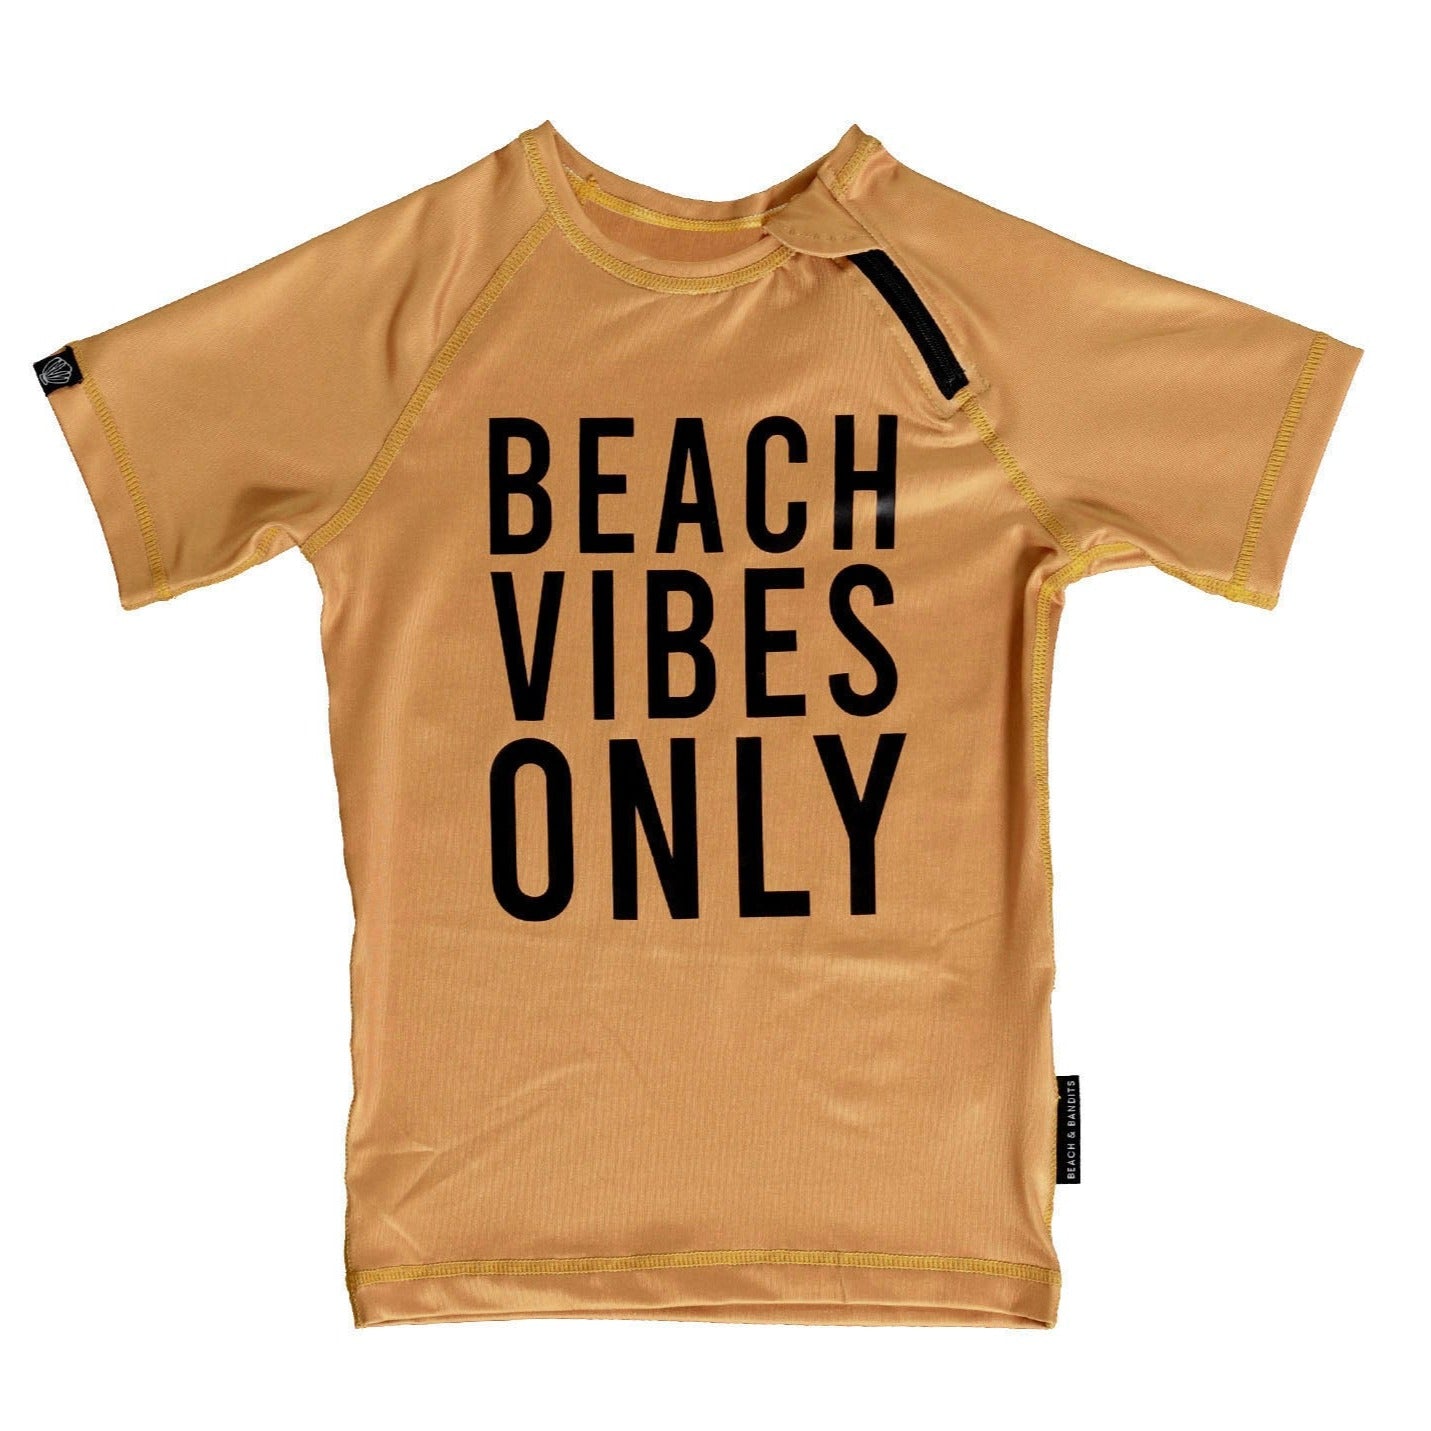 Beach Vibes Only Tee